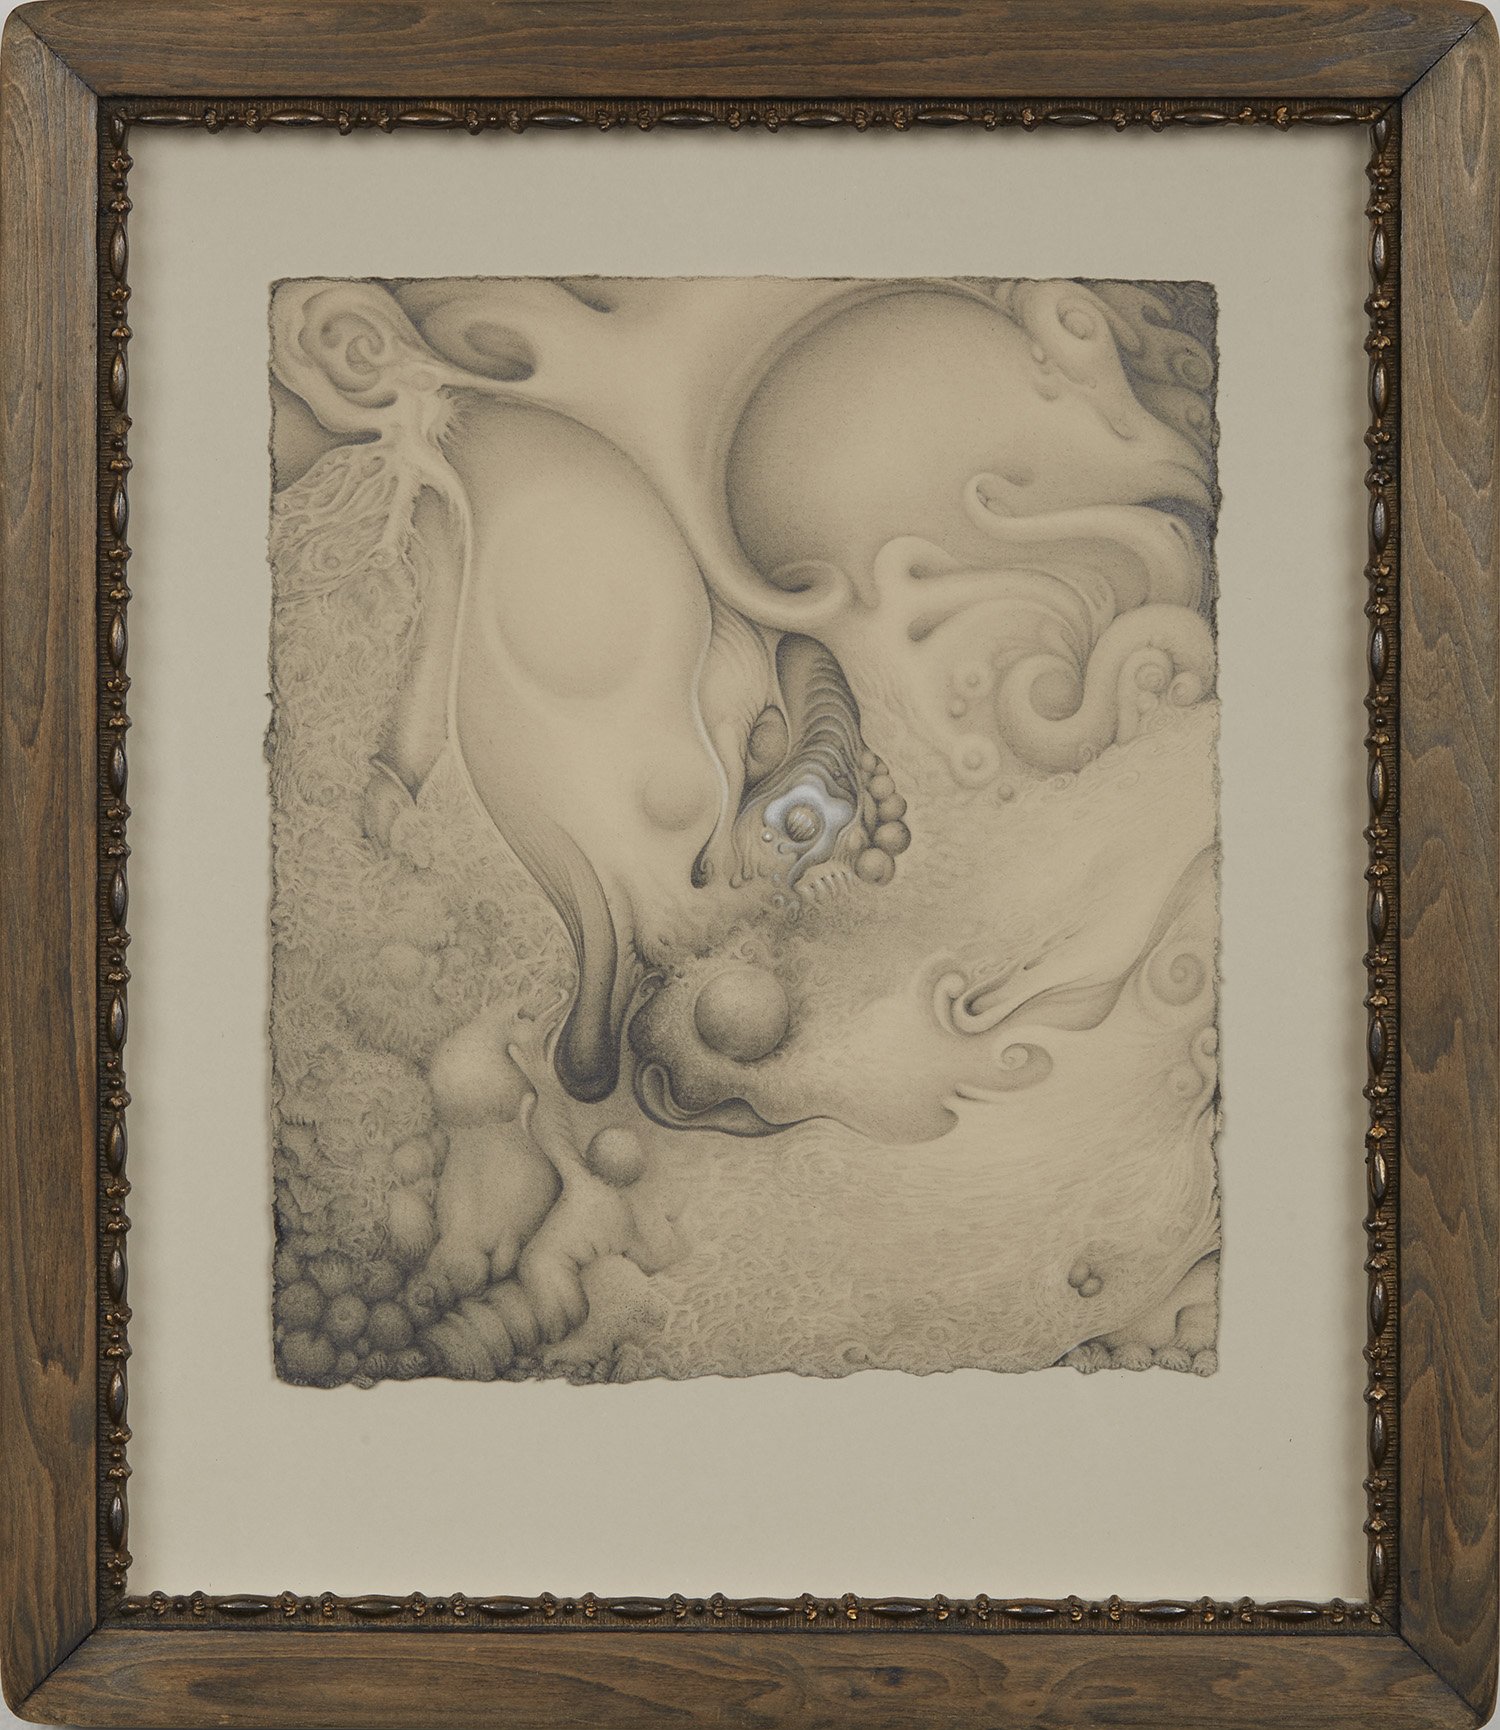   Frances Smokowski  WELCOMING GOOD FORTUNE  , 2012 Graphite on rag paper, antique frame refurbished by the artist 28.6 x 24.8 inches 72.6 x 63 cm FSm 2 